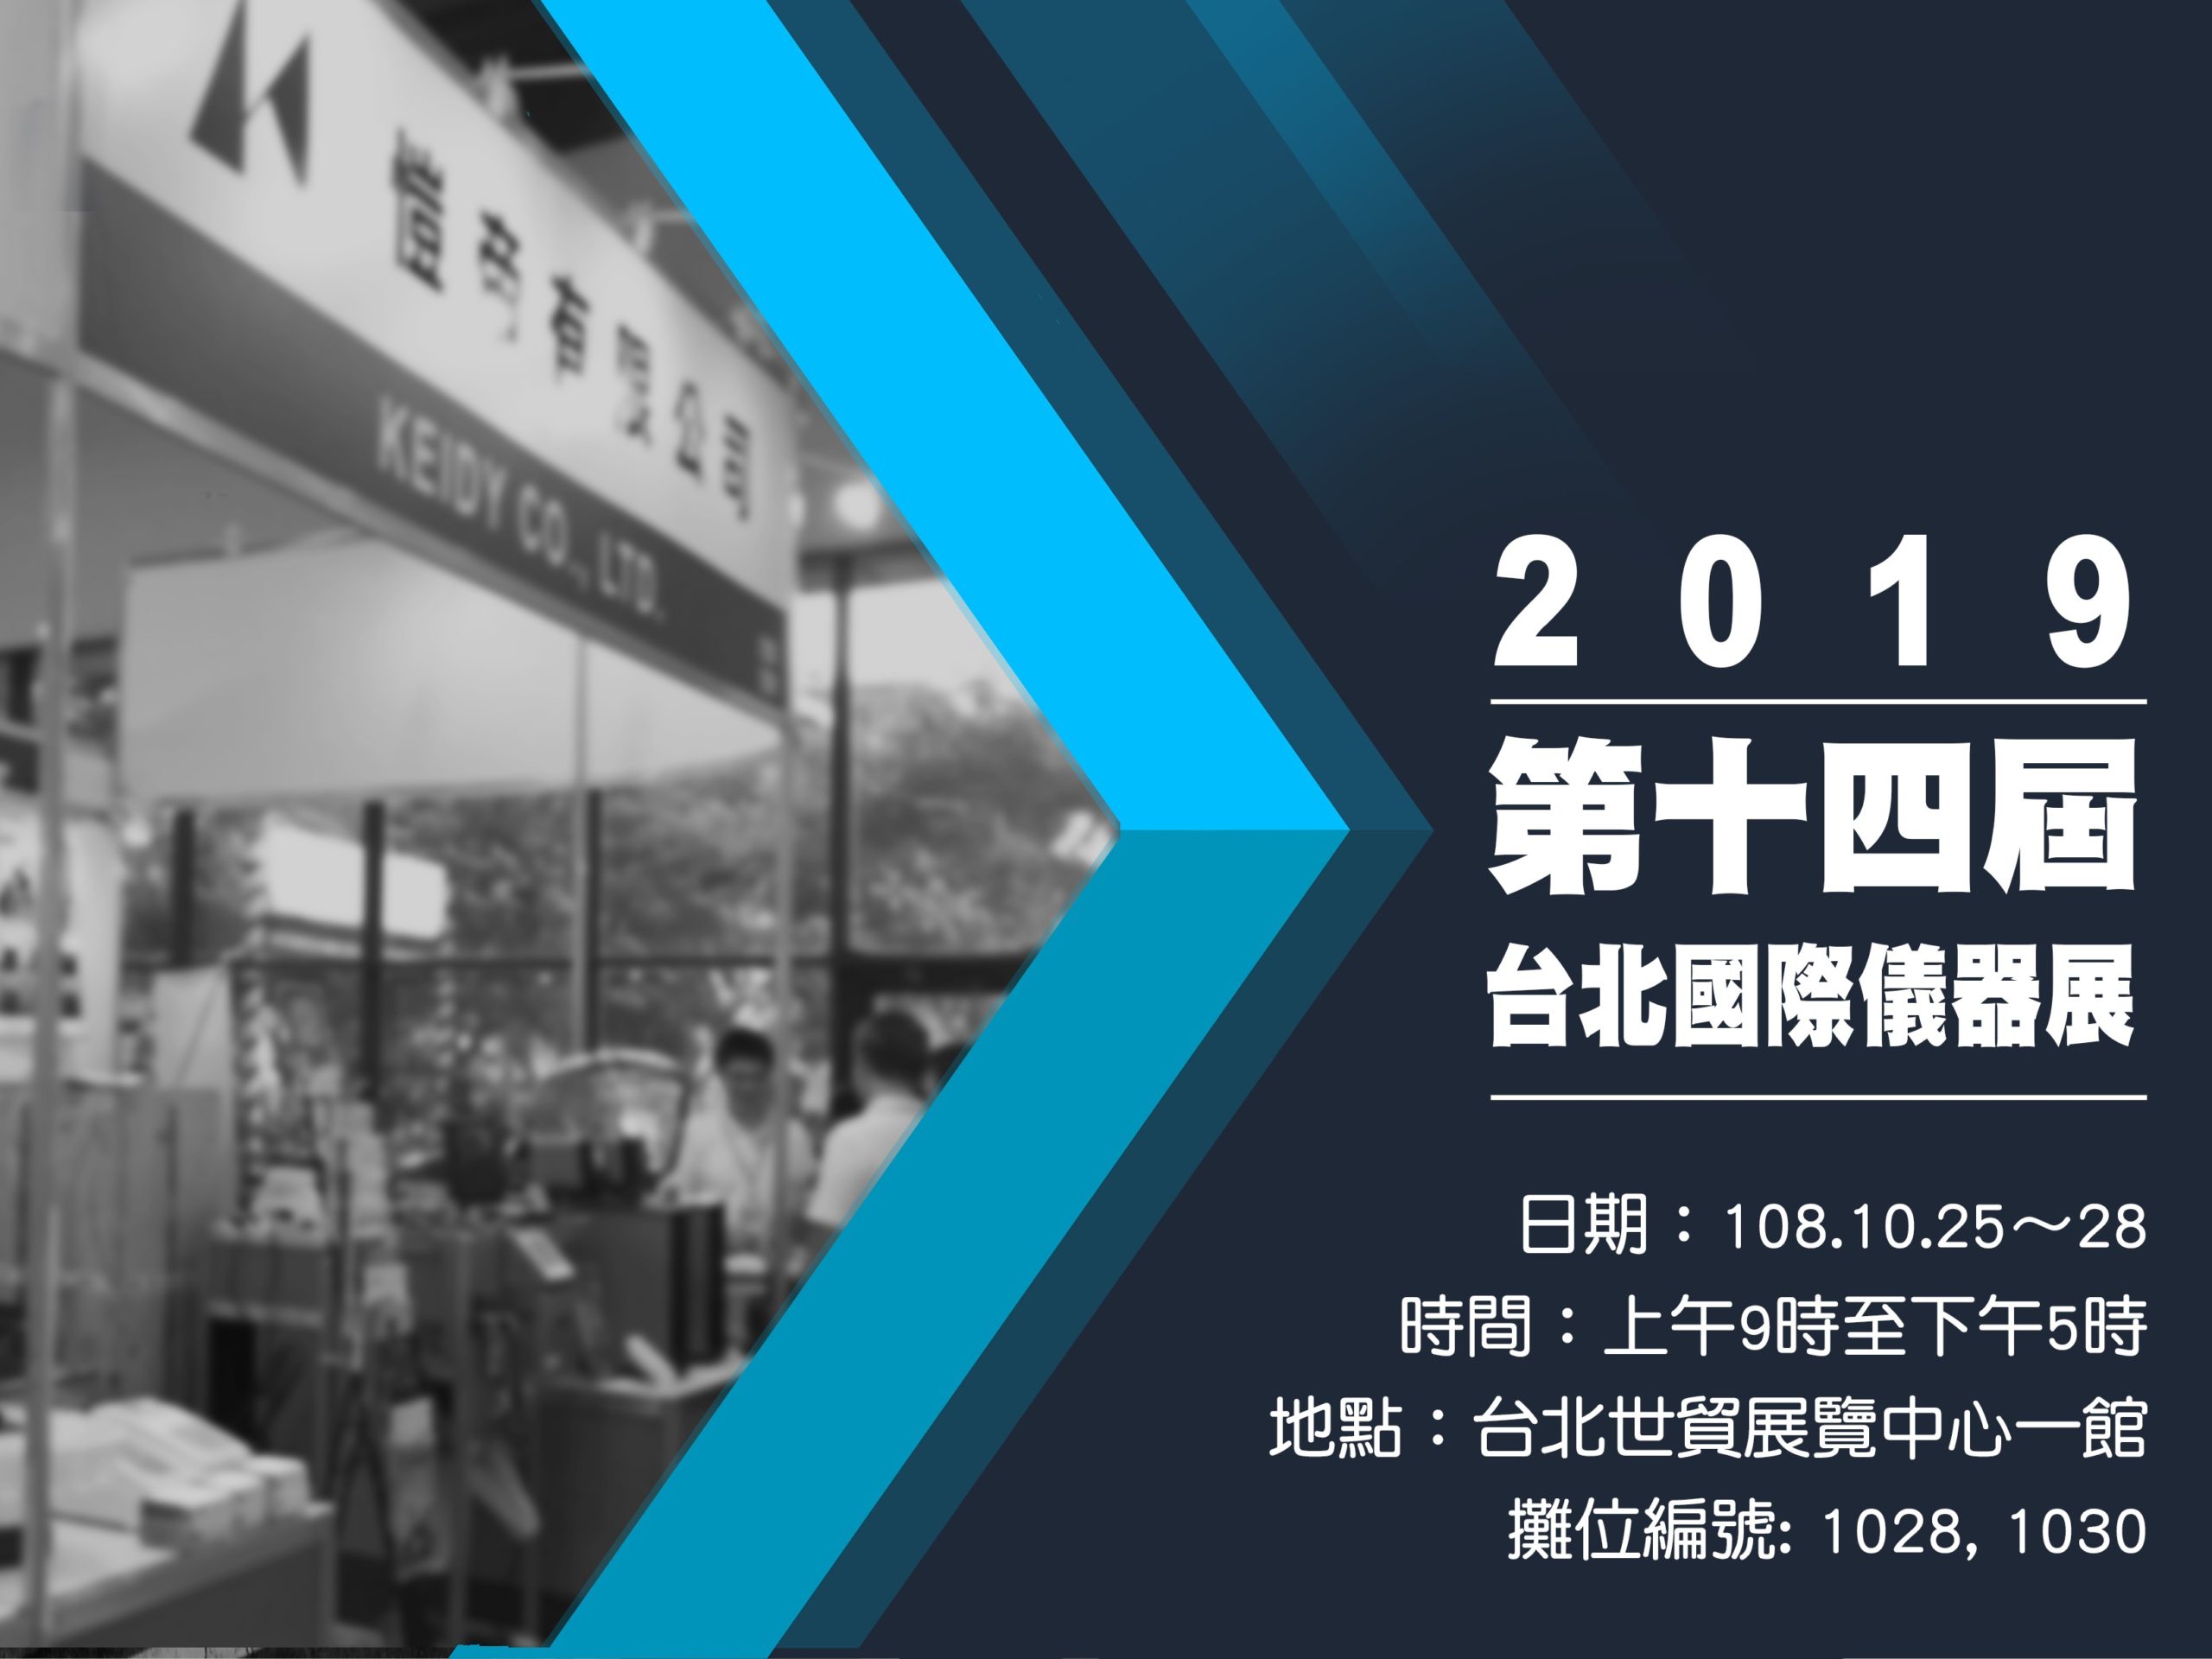 You are currently viewing 2019台北國際儀器展10/25~10/28歡迎蒞臨參觀